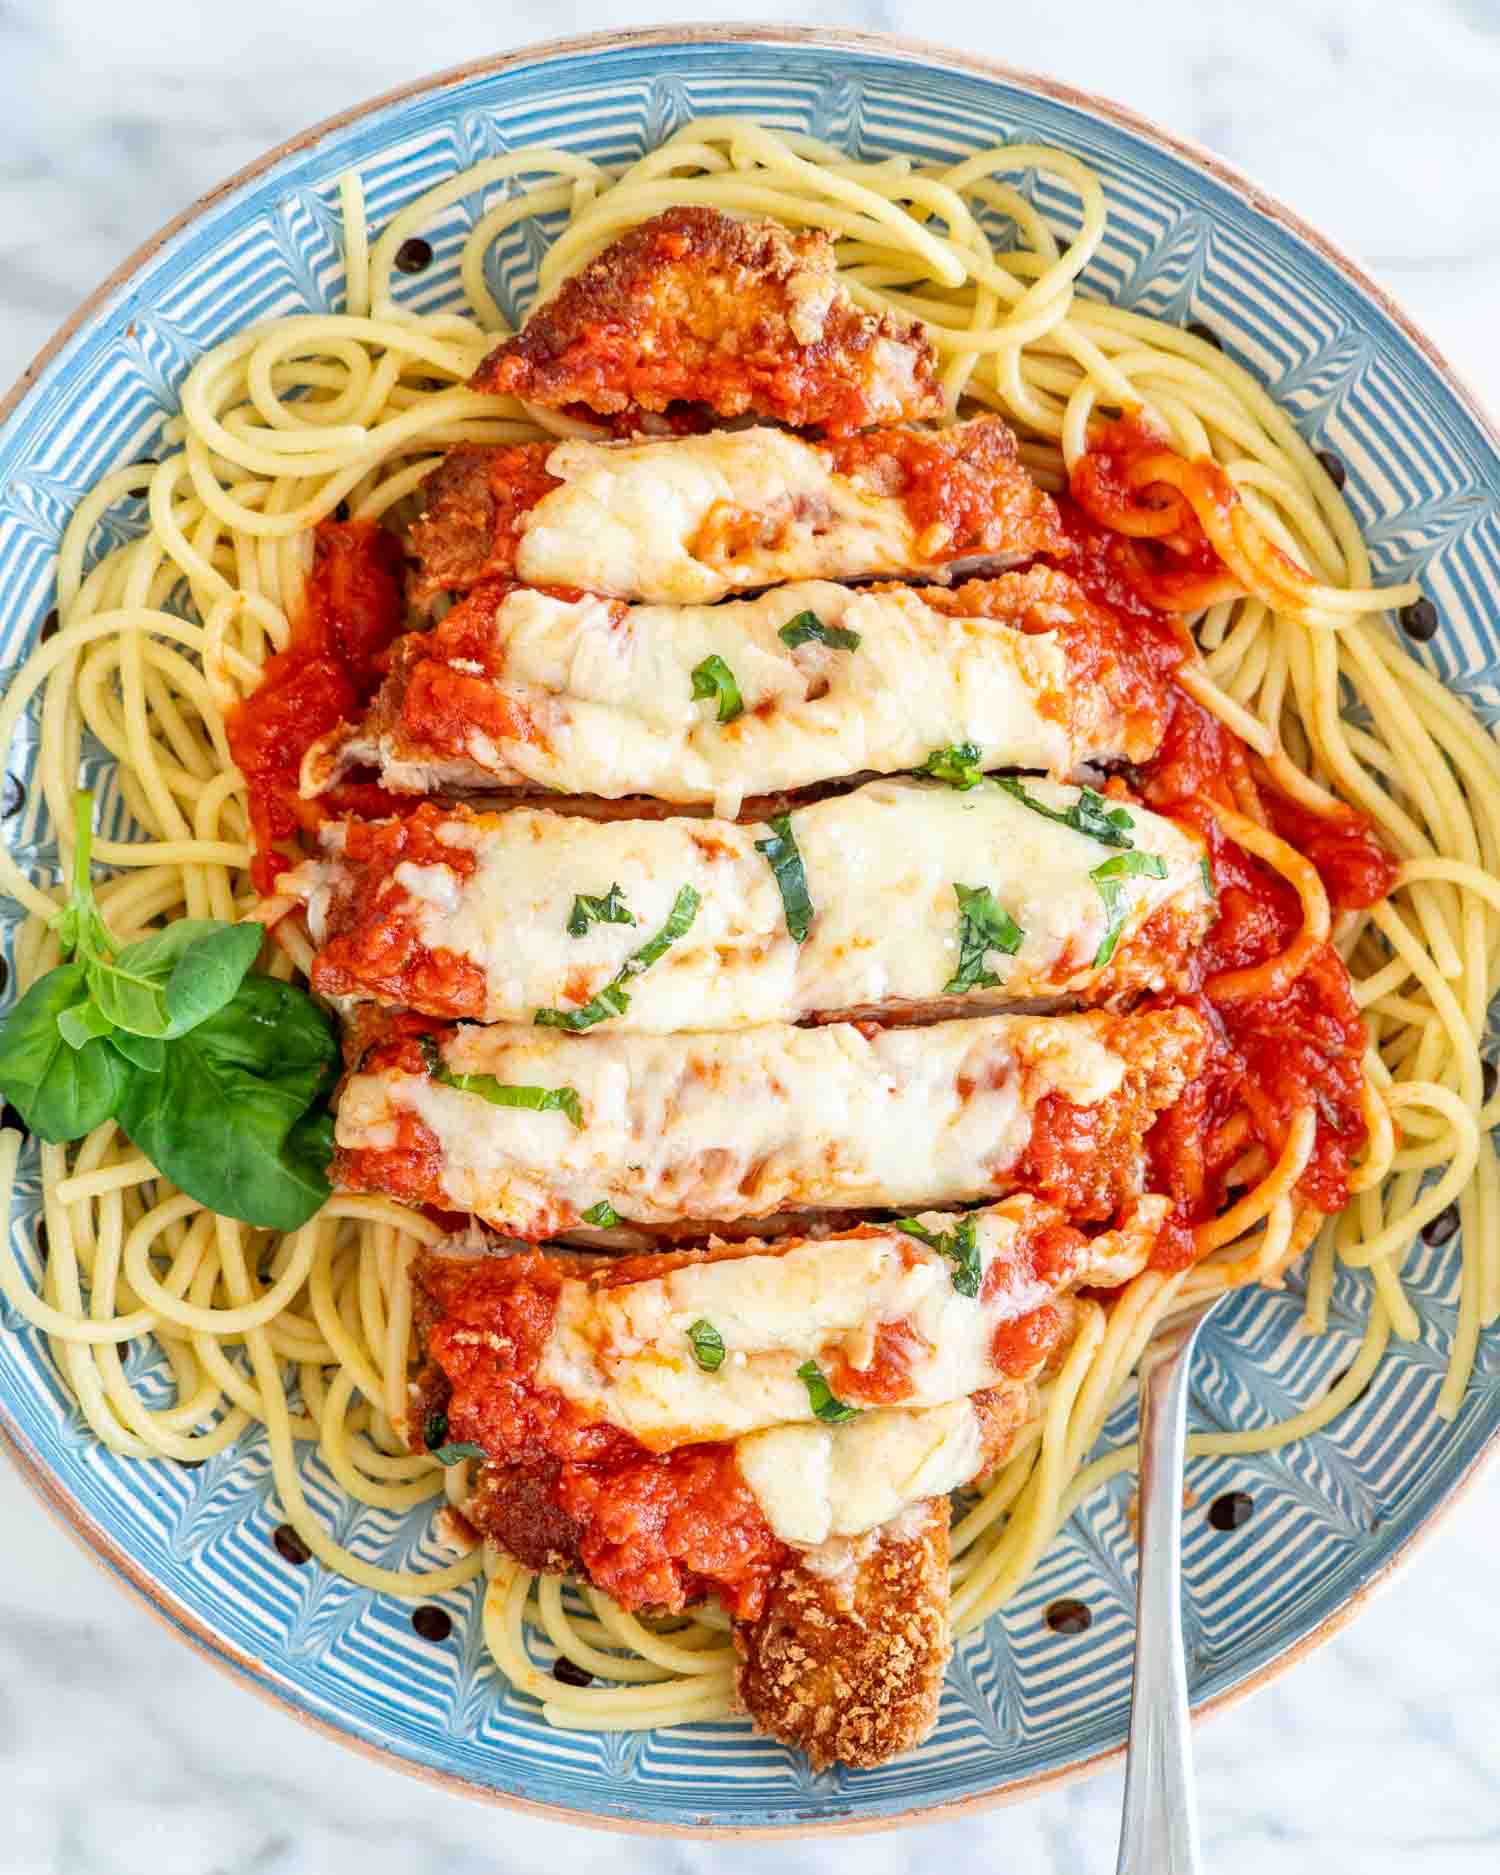 sliced up chicken parmesan on a bed of spaghetti garnished with some fresh basil.